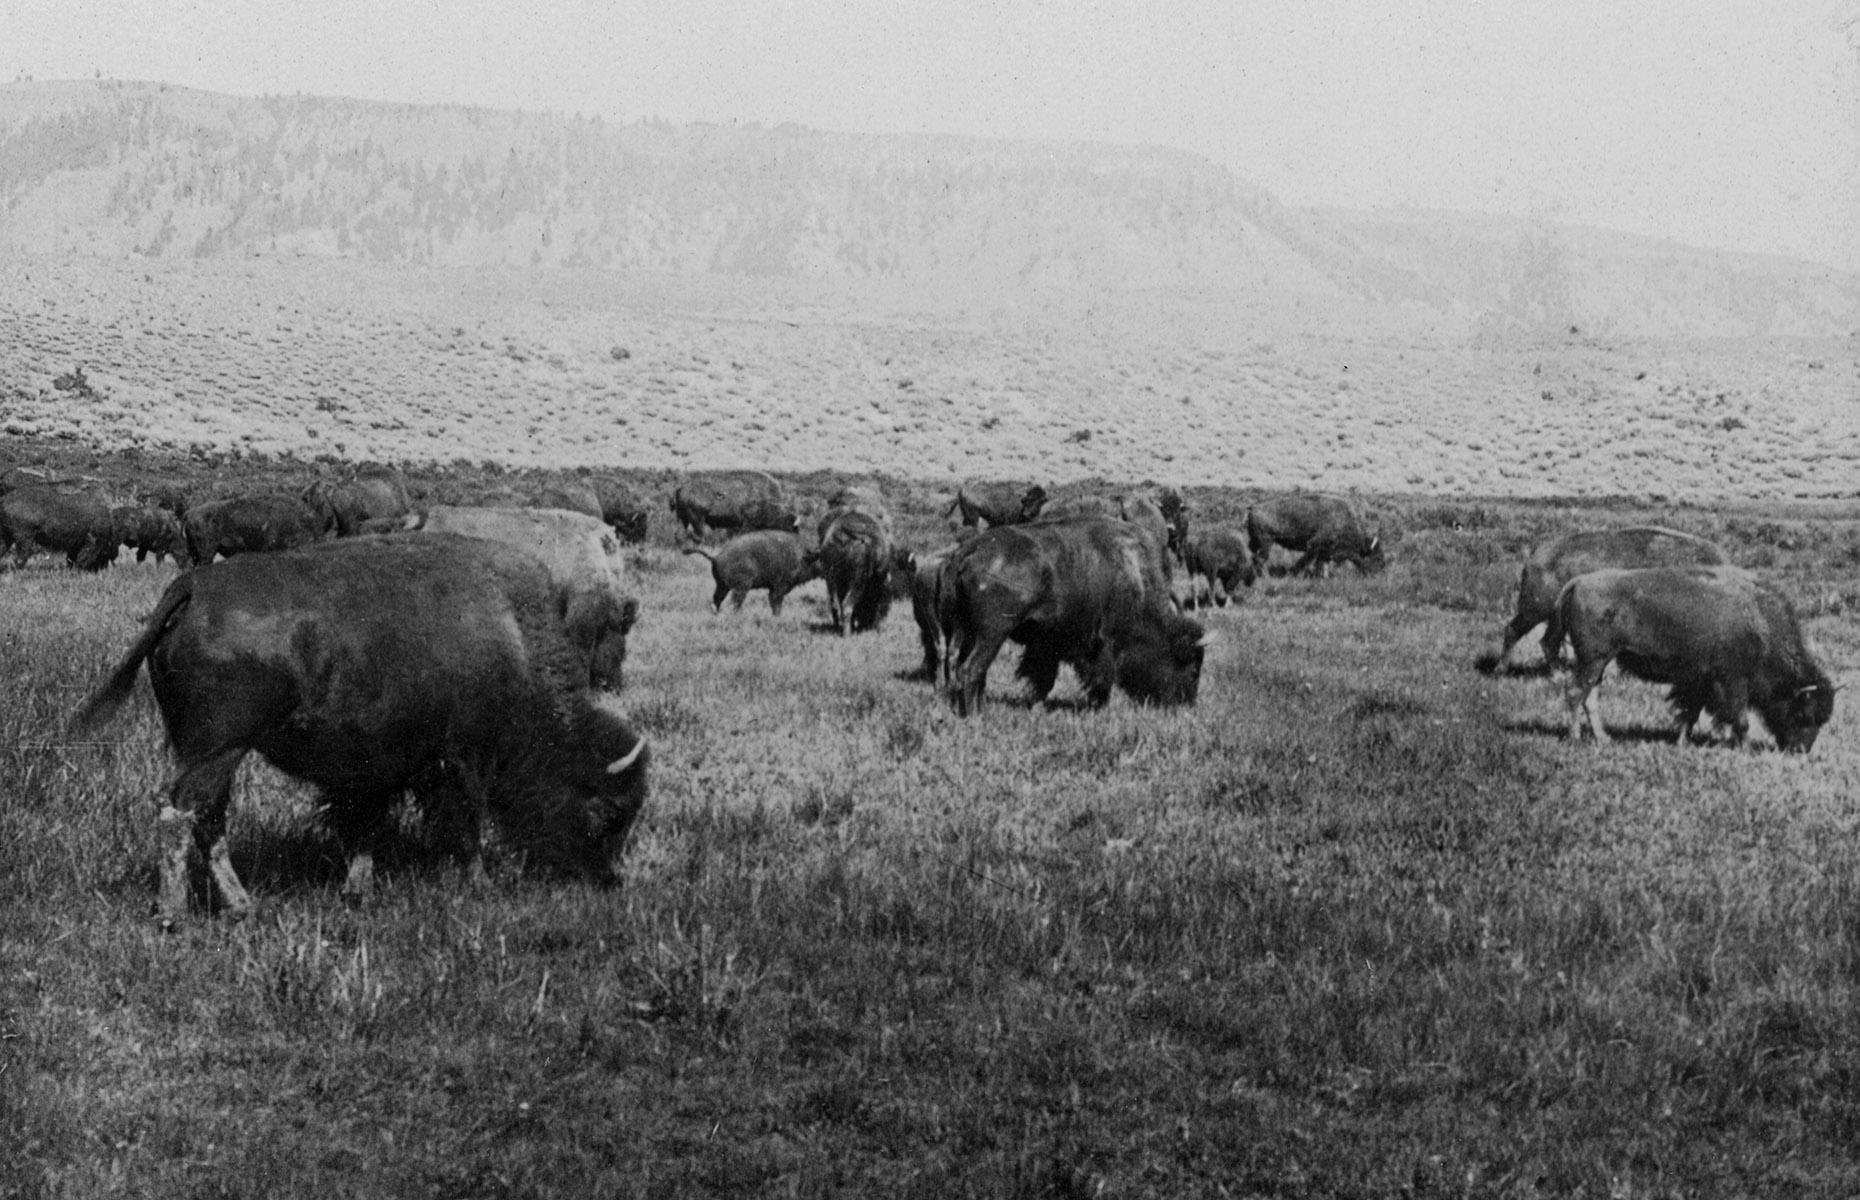 Yellowstone is home to the USA's oldest free-roaming bison herd and these hulking creatures have been a draw of the park from the beginning. However, bison were aggressively hunted through the 19th century and their population dwindled dramatically. In an early conservation effort, in 1902, privately owned bison were raised and eventually released into the park's existing herd. Numbers grew into the thousands once more, and today hunting is prohibited in Yellowstone National Park.